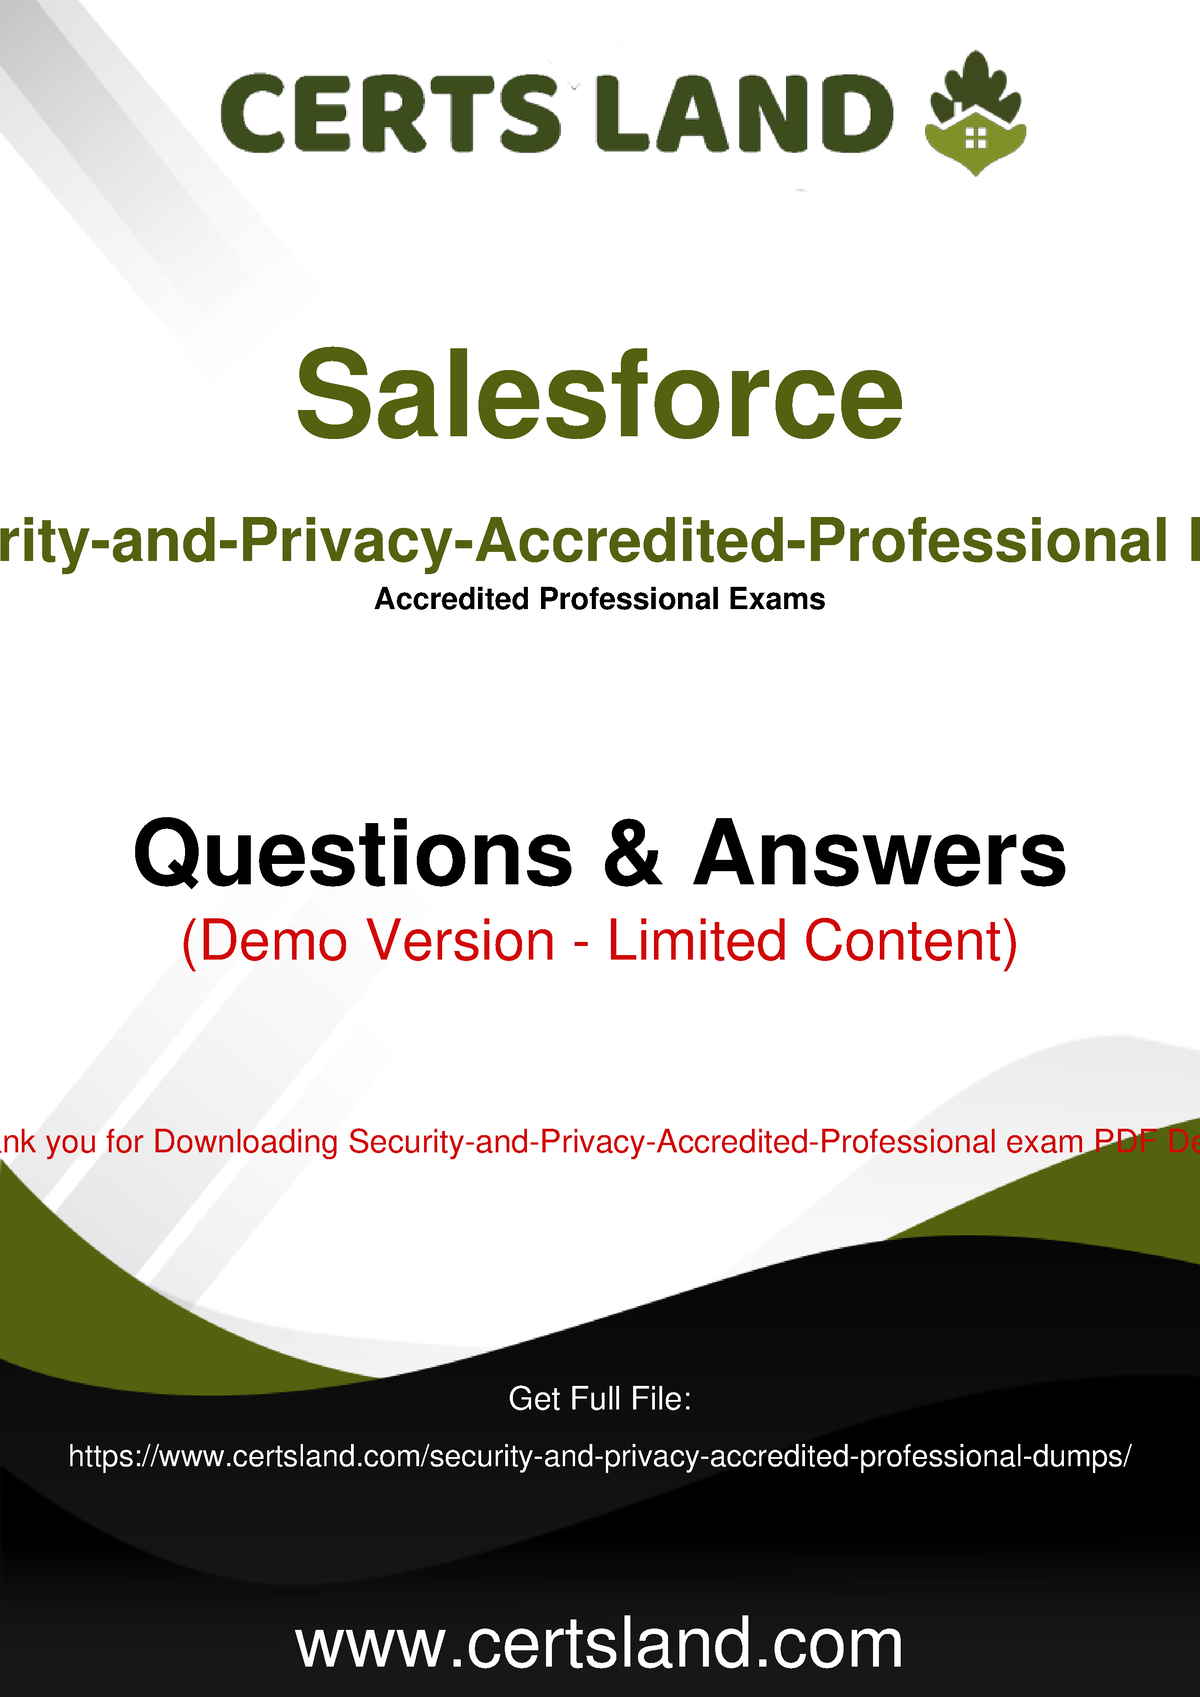 Security-and-Privacy-Accredited-Professional Examsfragen